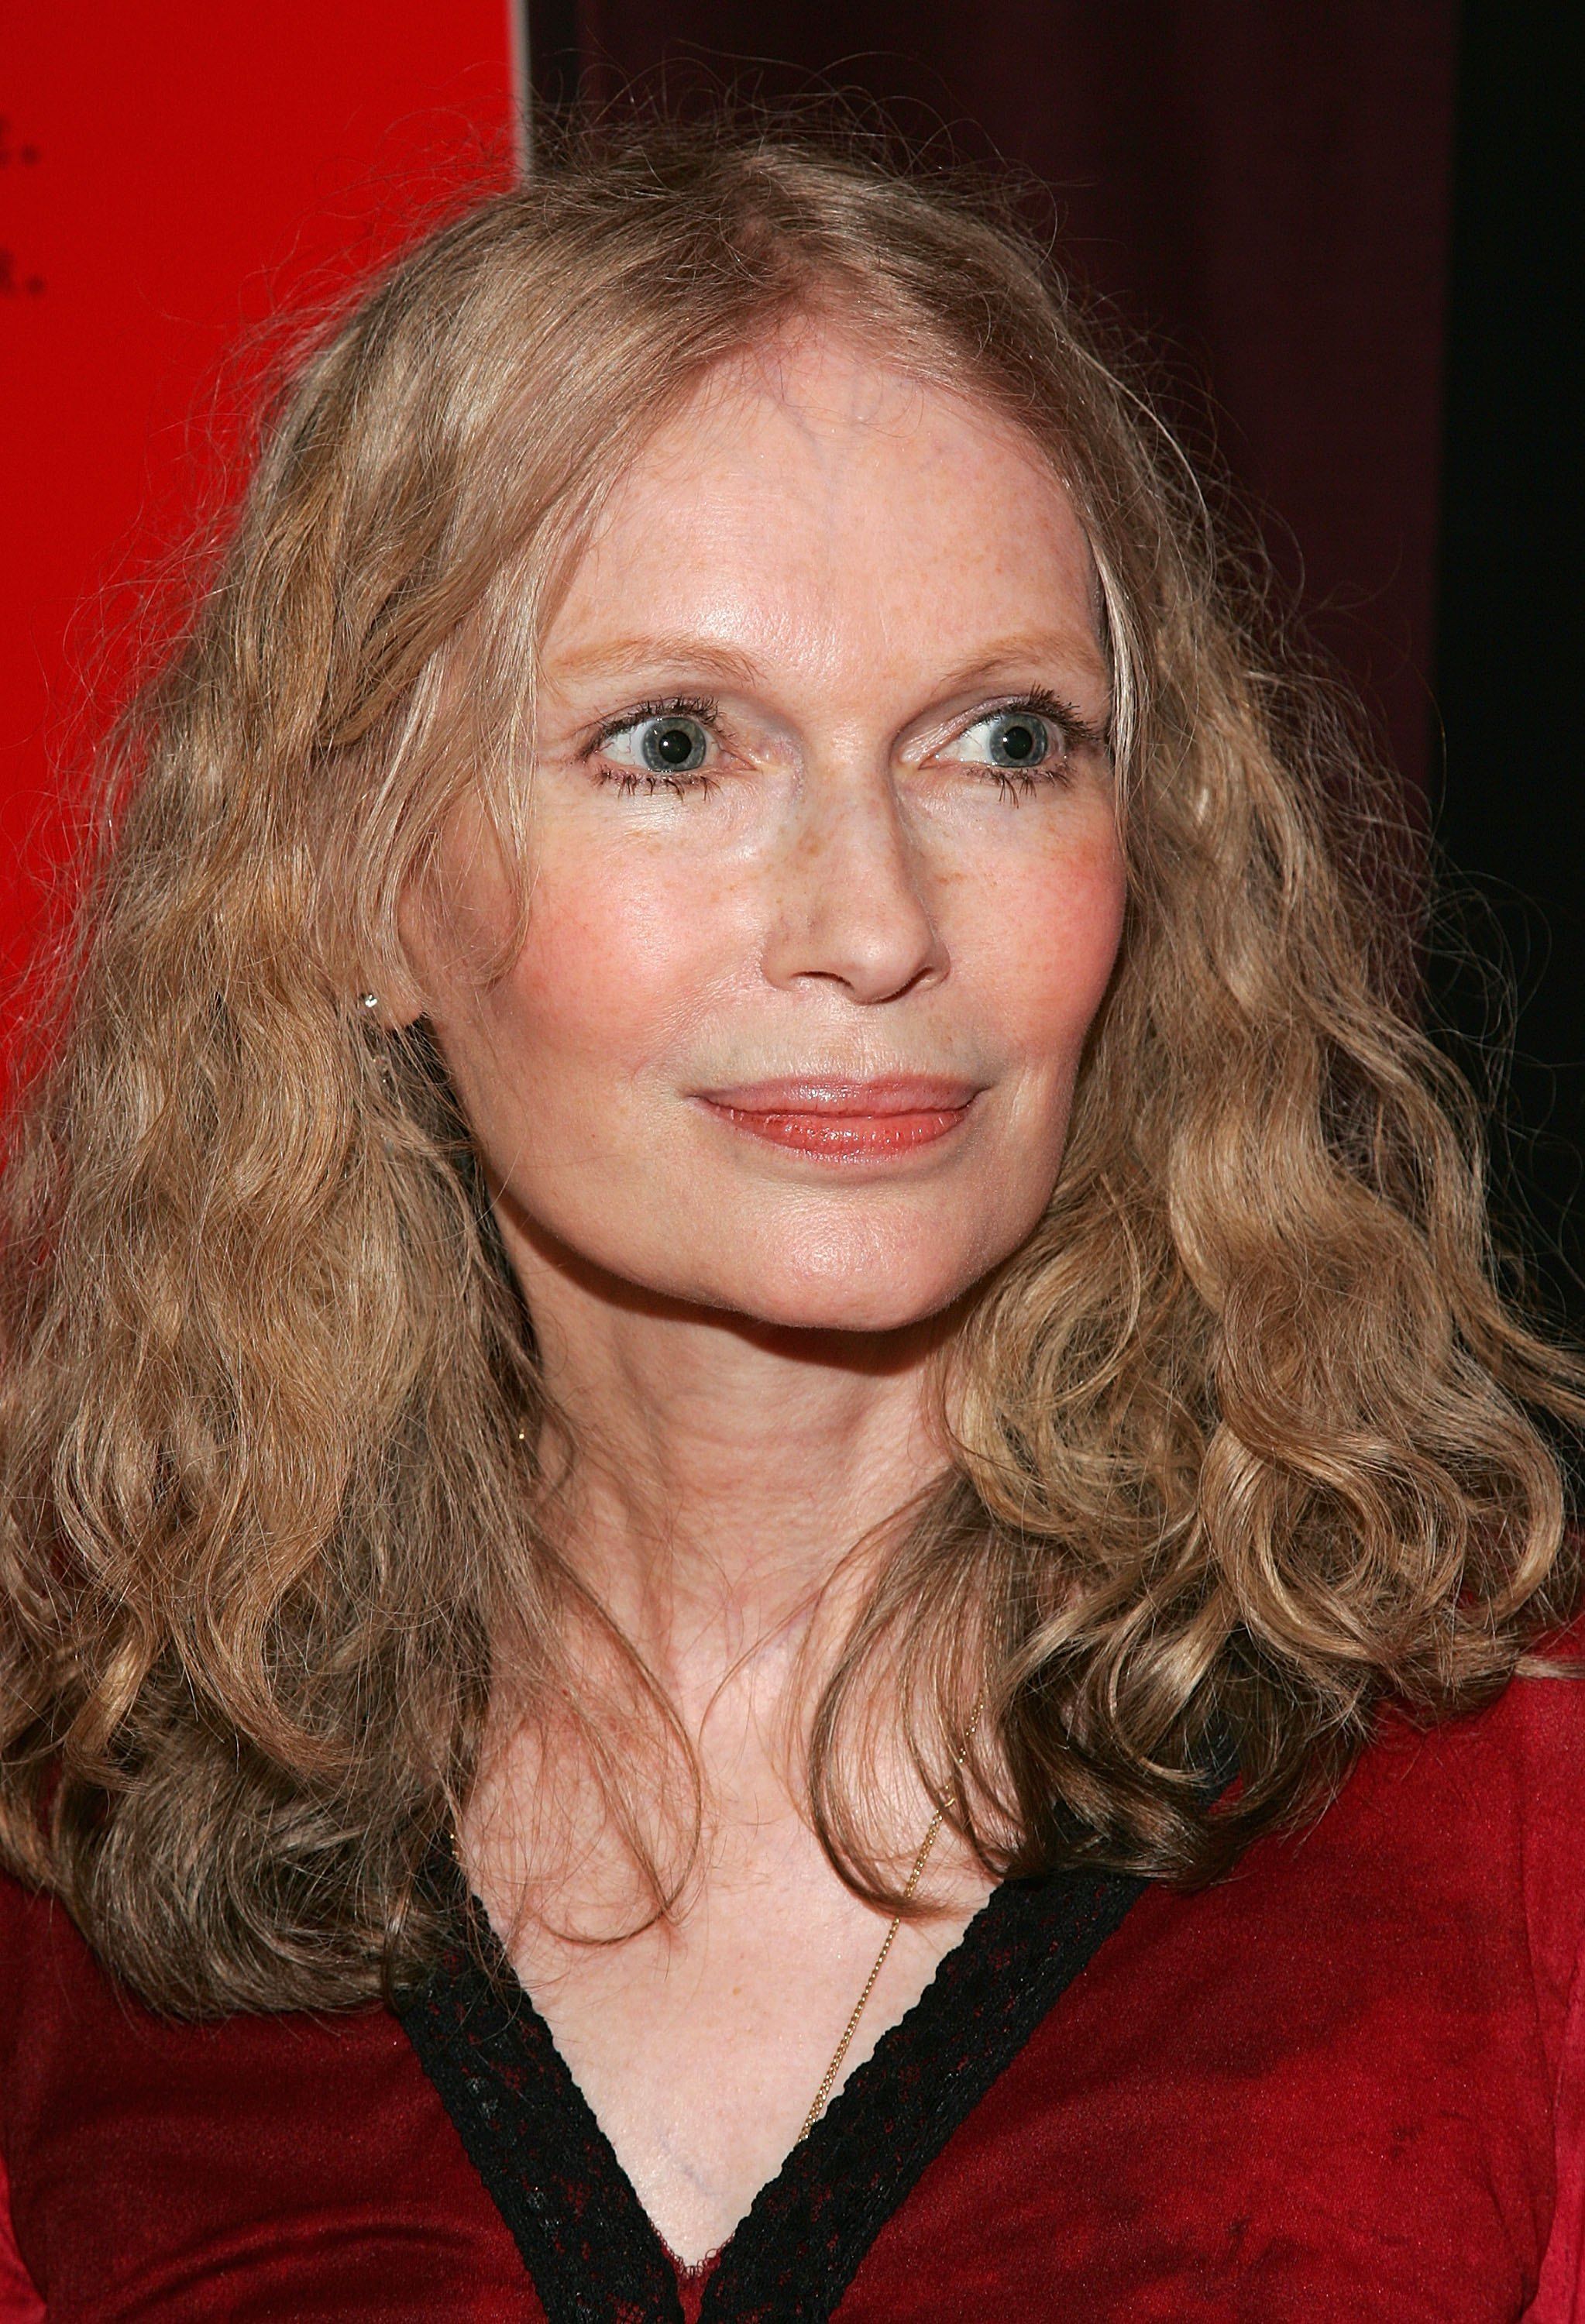 Mia Farrow at a screening of "The Omen" held at the Angel Orensanz Foundation May 31, 2006, in New York City | Photo: Evan Agostini/Getty Images